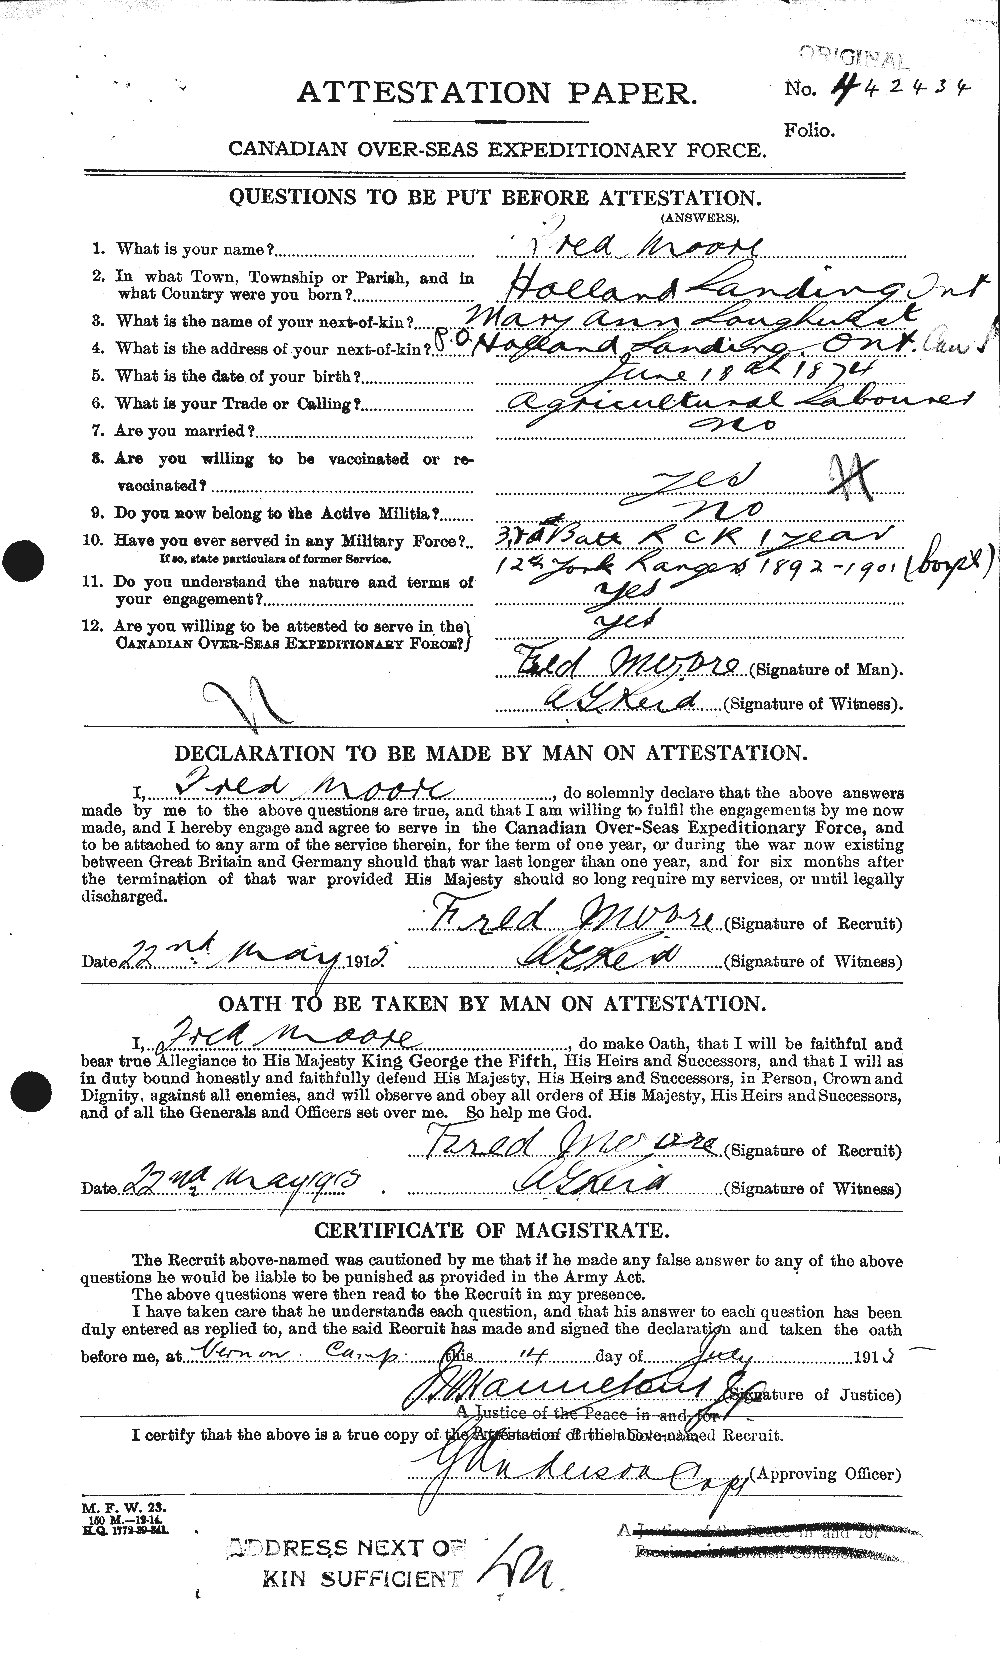 Personnel Records of the First World War - CEF 506722a